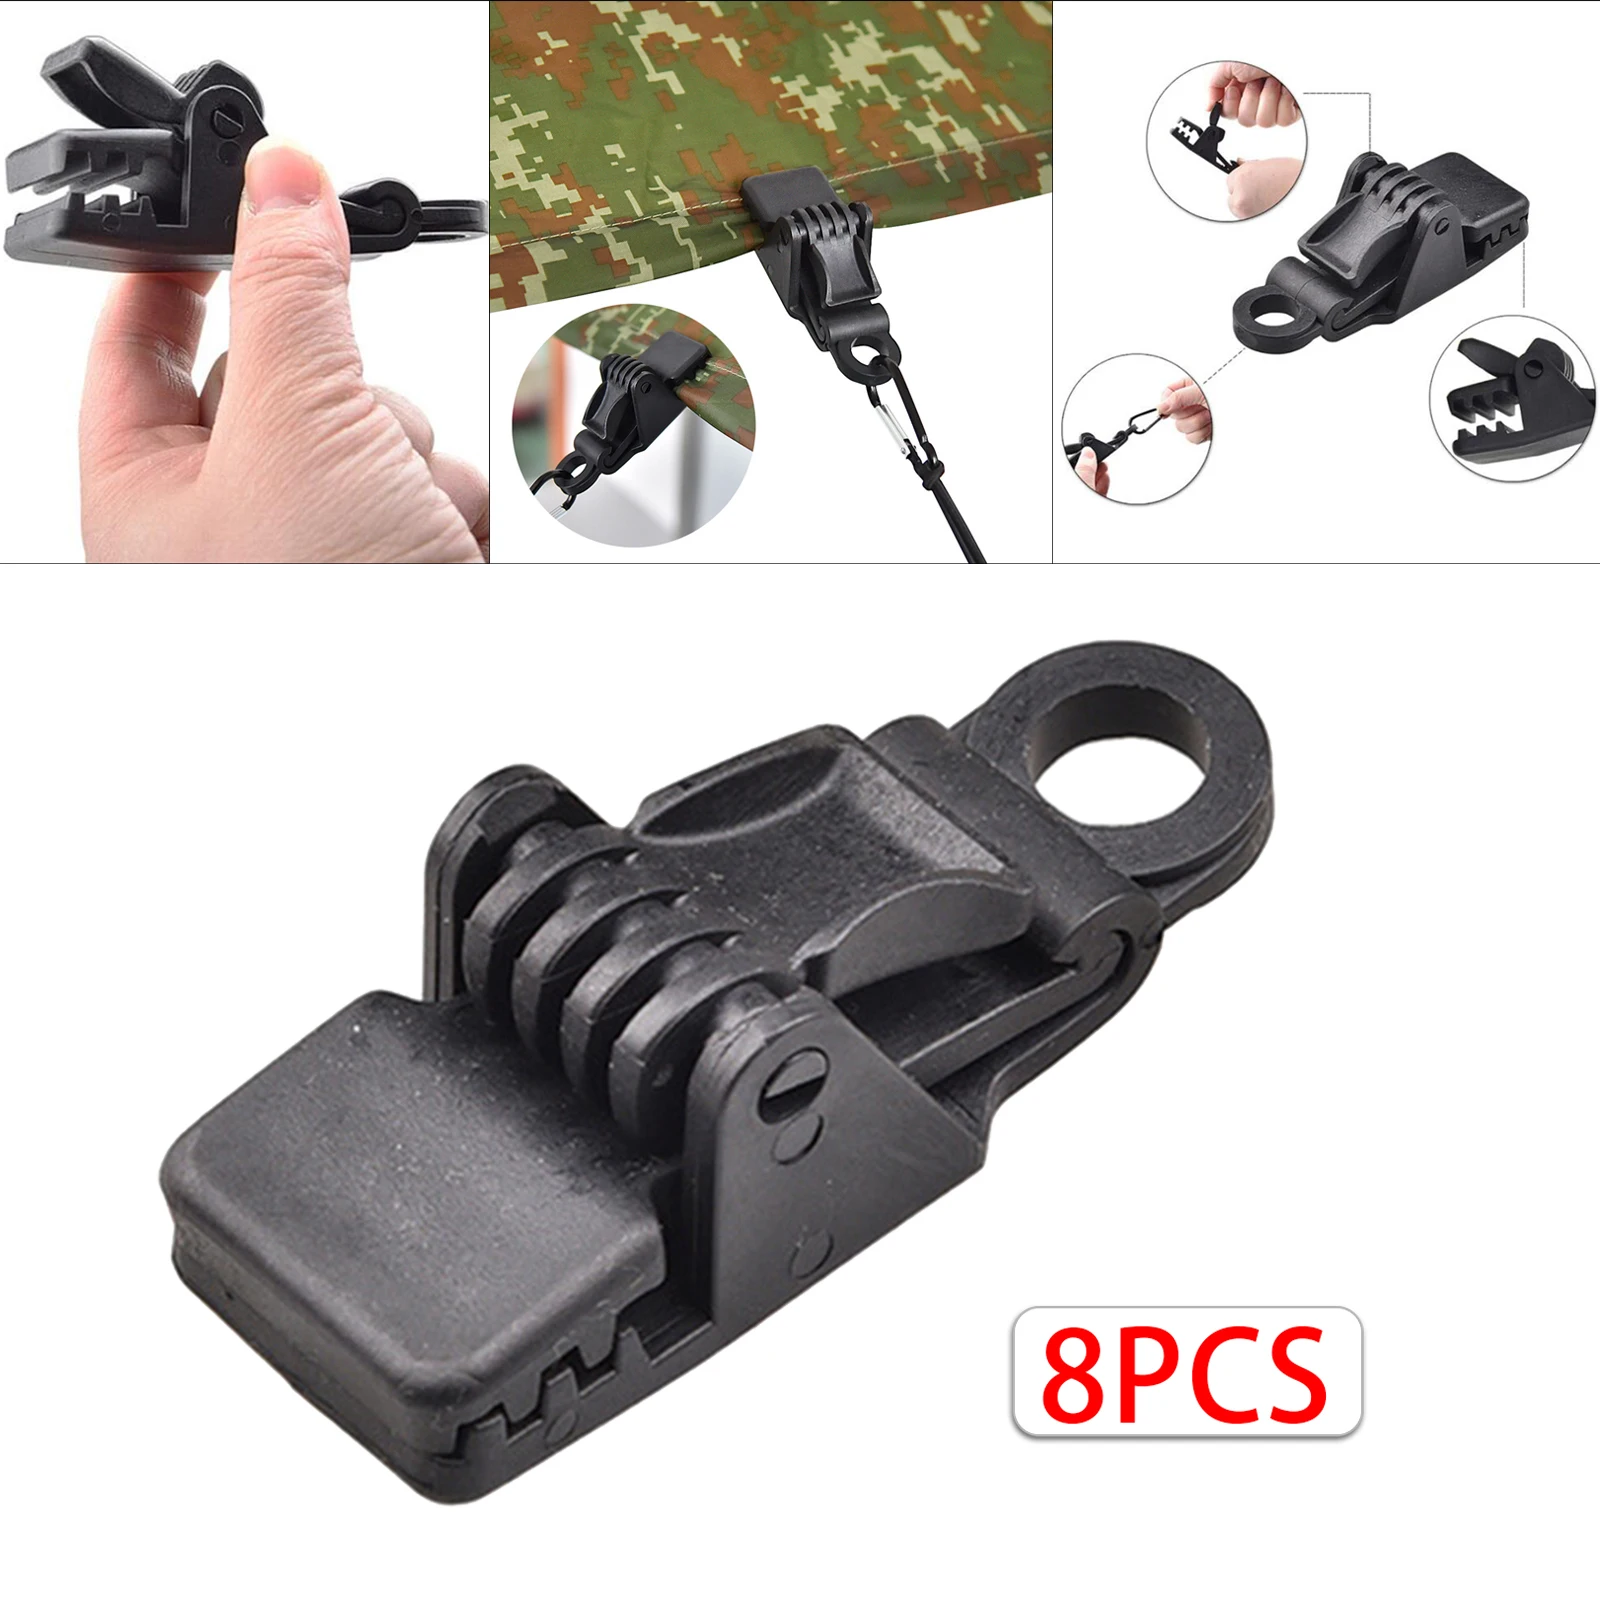 8Pcs Outdoor Tarp Clamp Awning Tent Canopy Clamp Camping Survival Emergency Tighten Tool Tarpaulin Clip Snap Tent Accessories